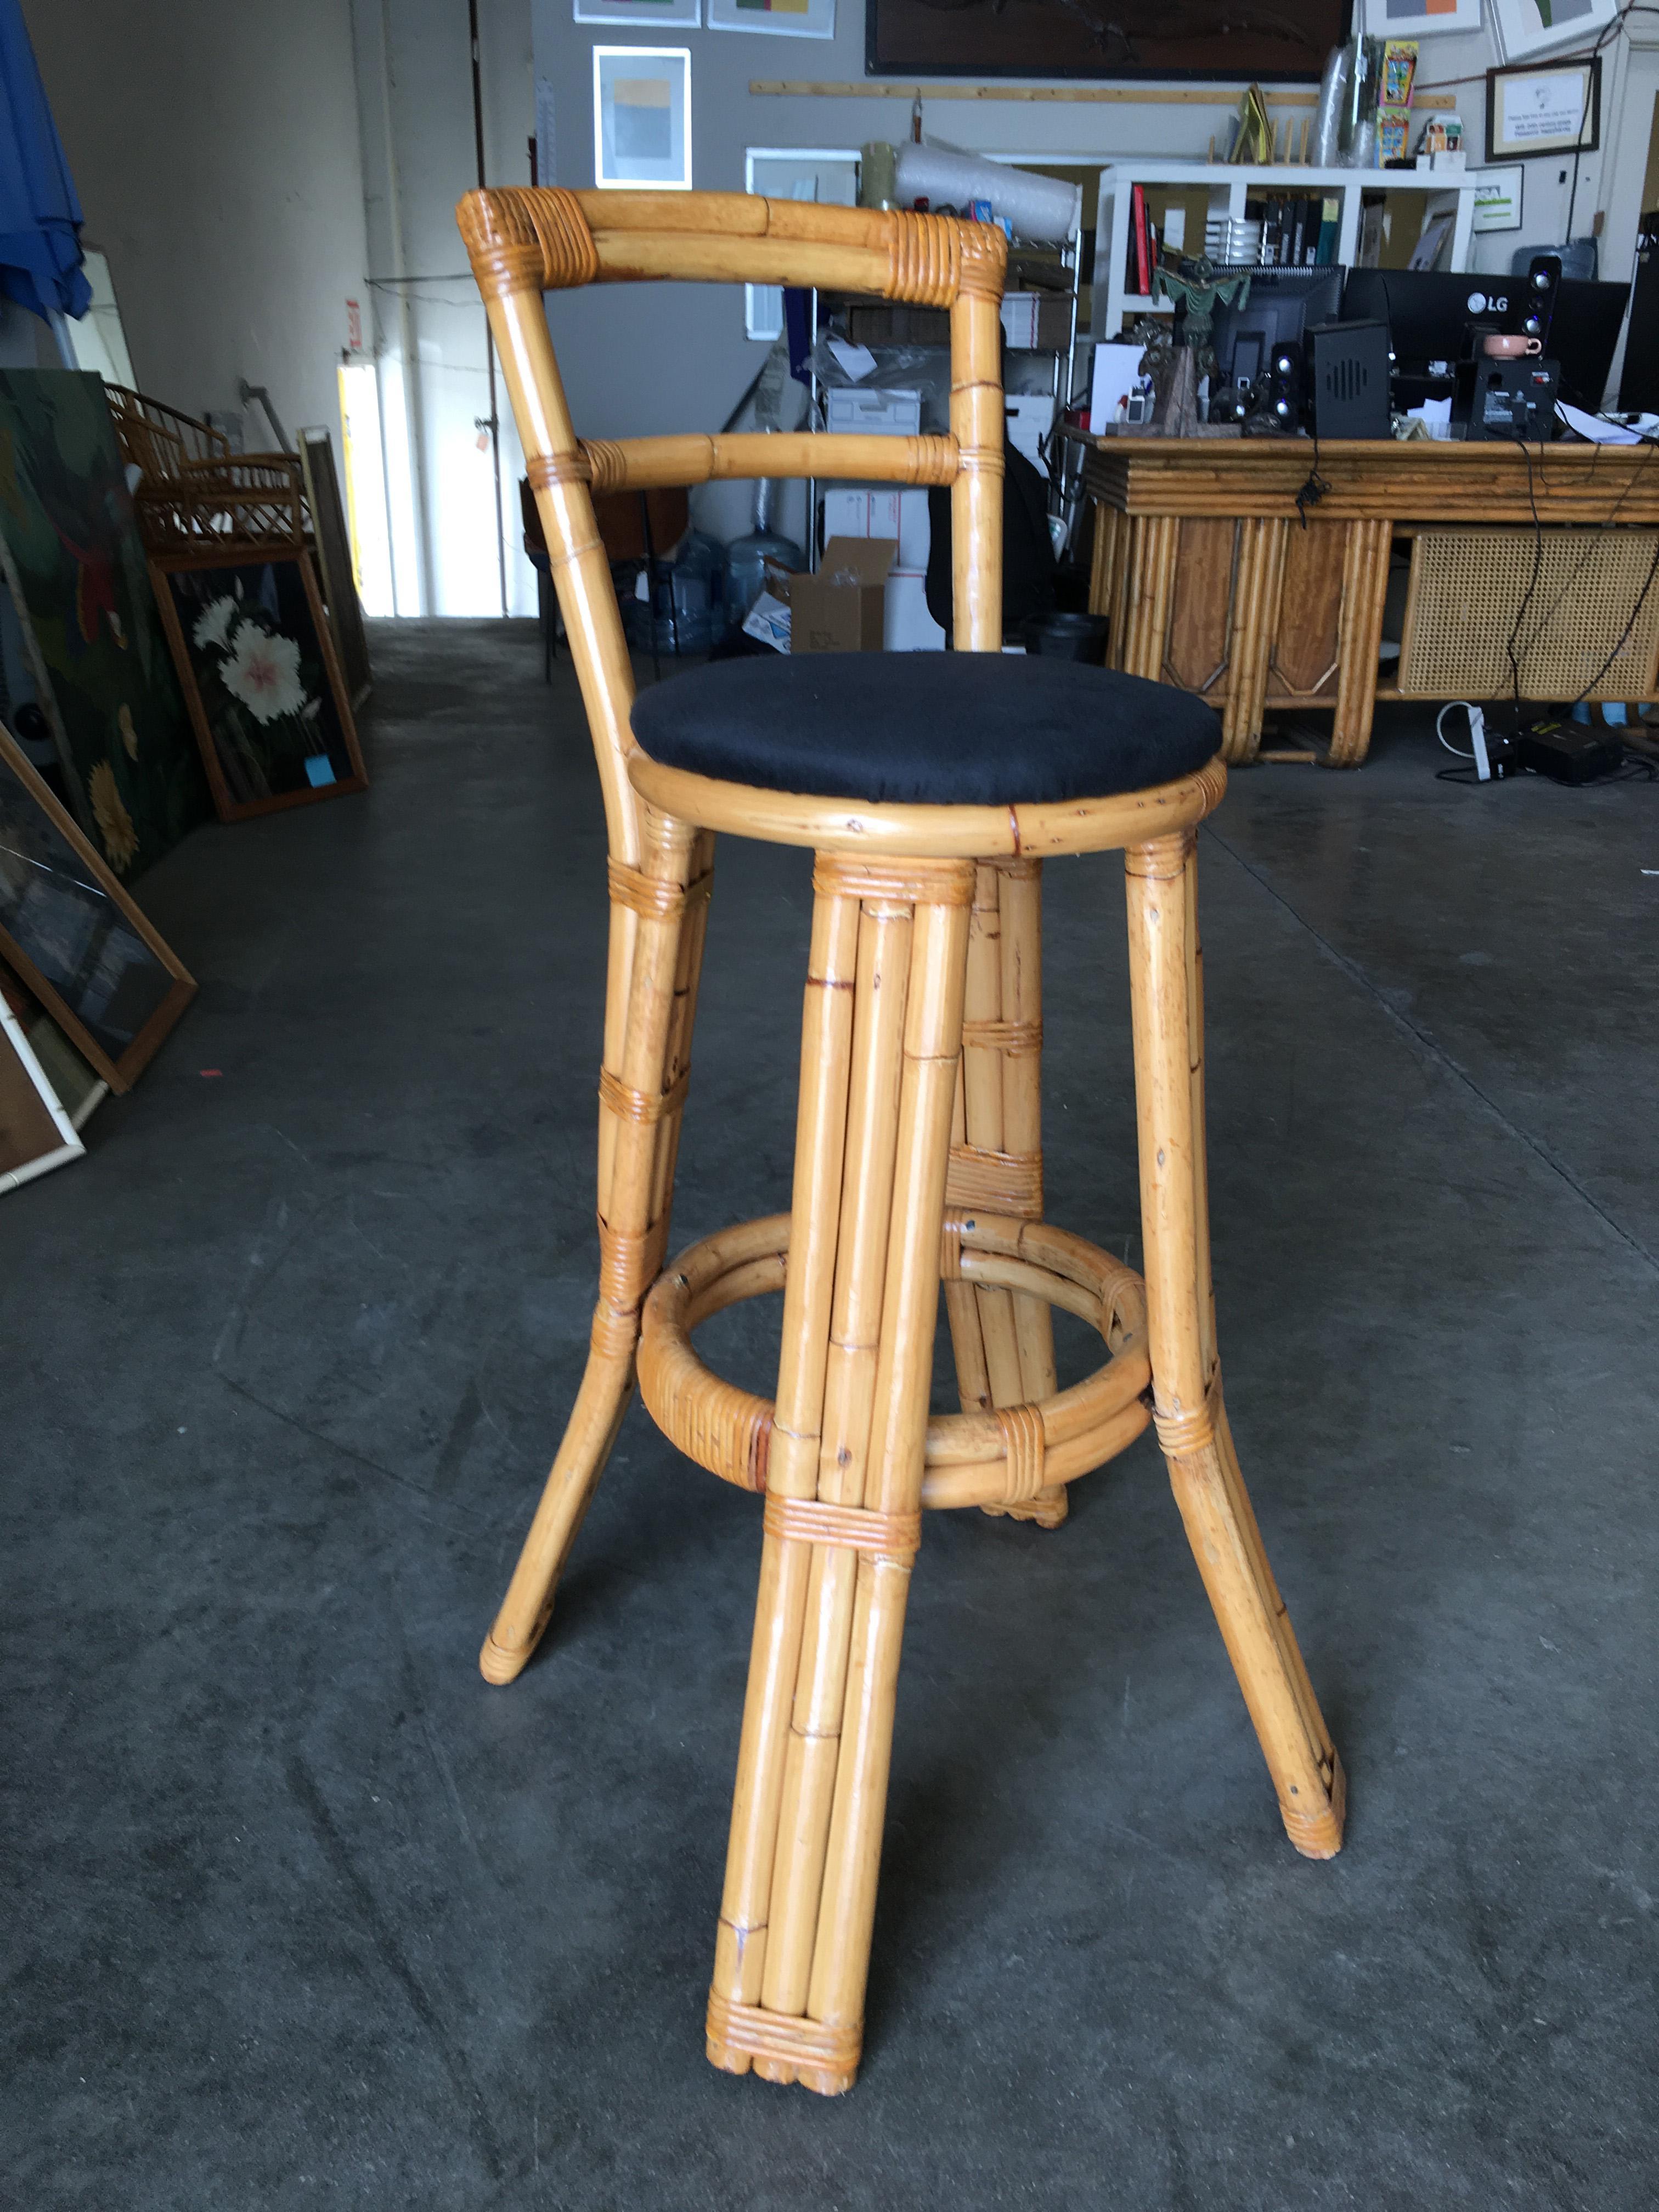 Set of two rattan bar stools with black cotton seats and three strand rattan pull legs. Each stool comes with a full formed backrest complimented by Branching 3 strand legs. All pieces listed are professionally restored. All our rattan, bamboo and